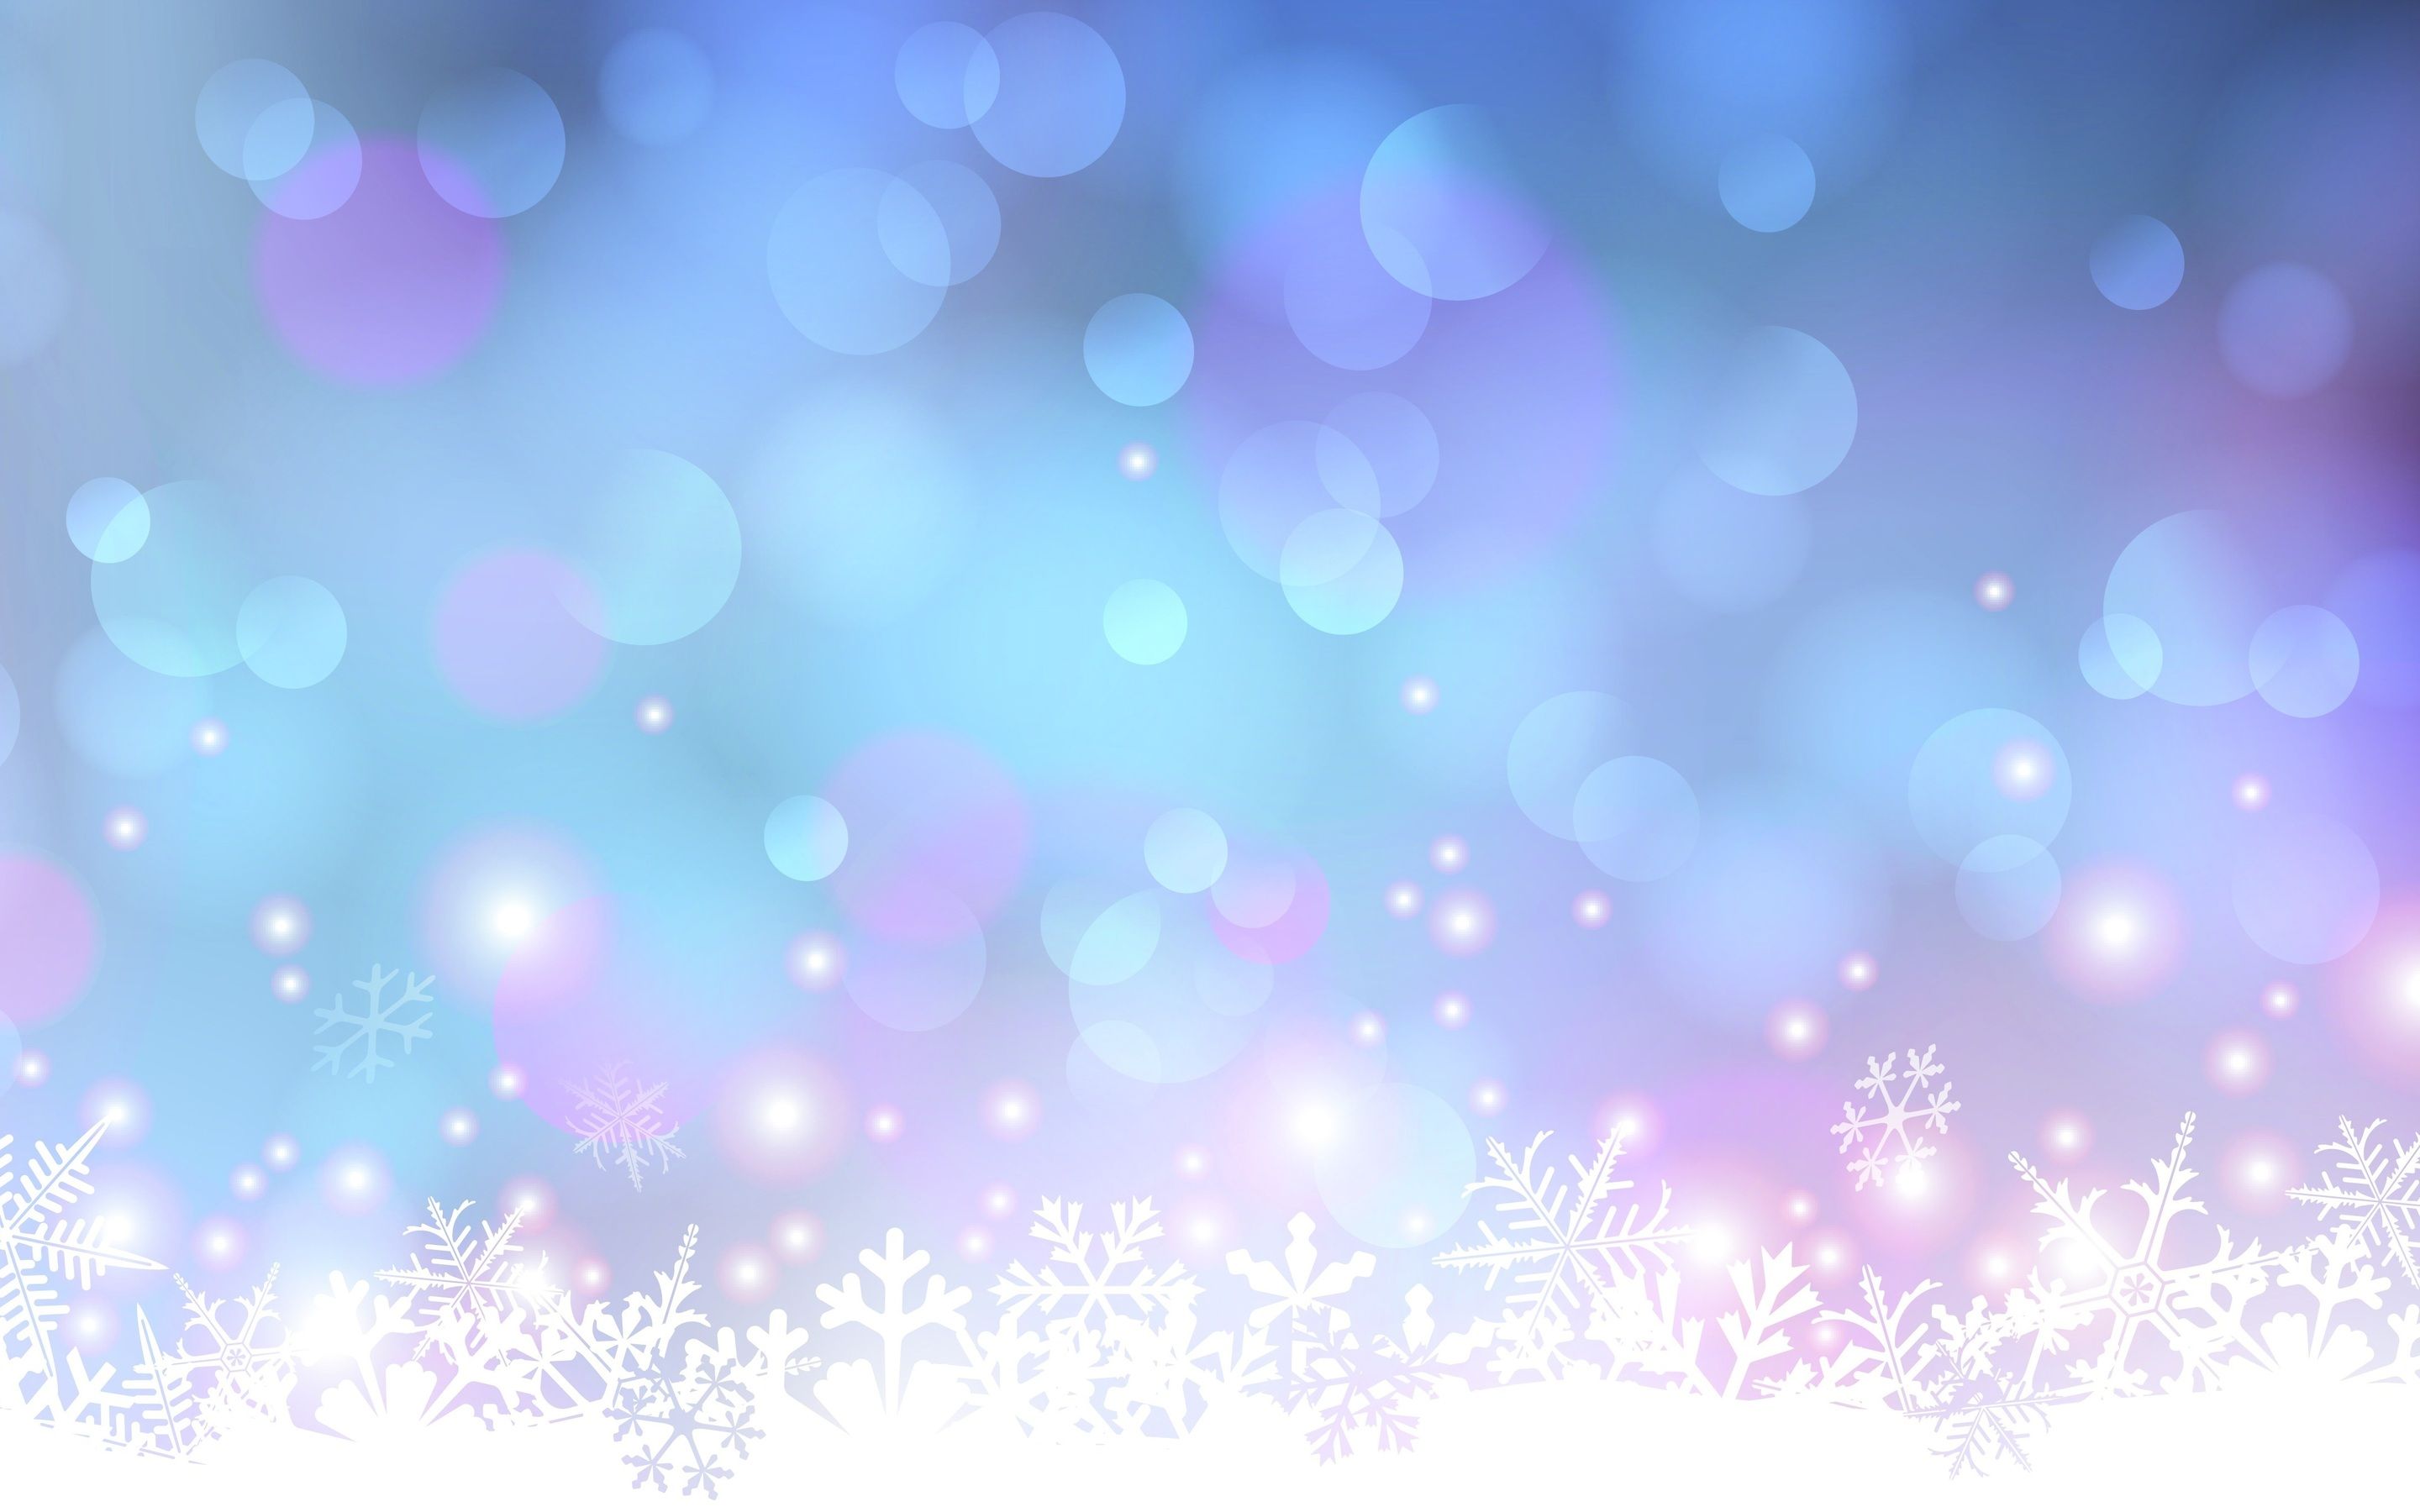 Christmas background, photo, picture, image. Snowflake wallpaper, Holiday wallpaper, Cute background picture